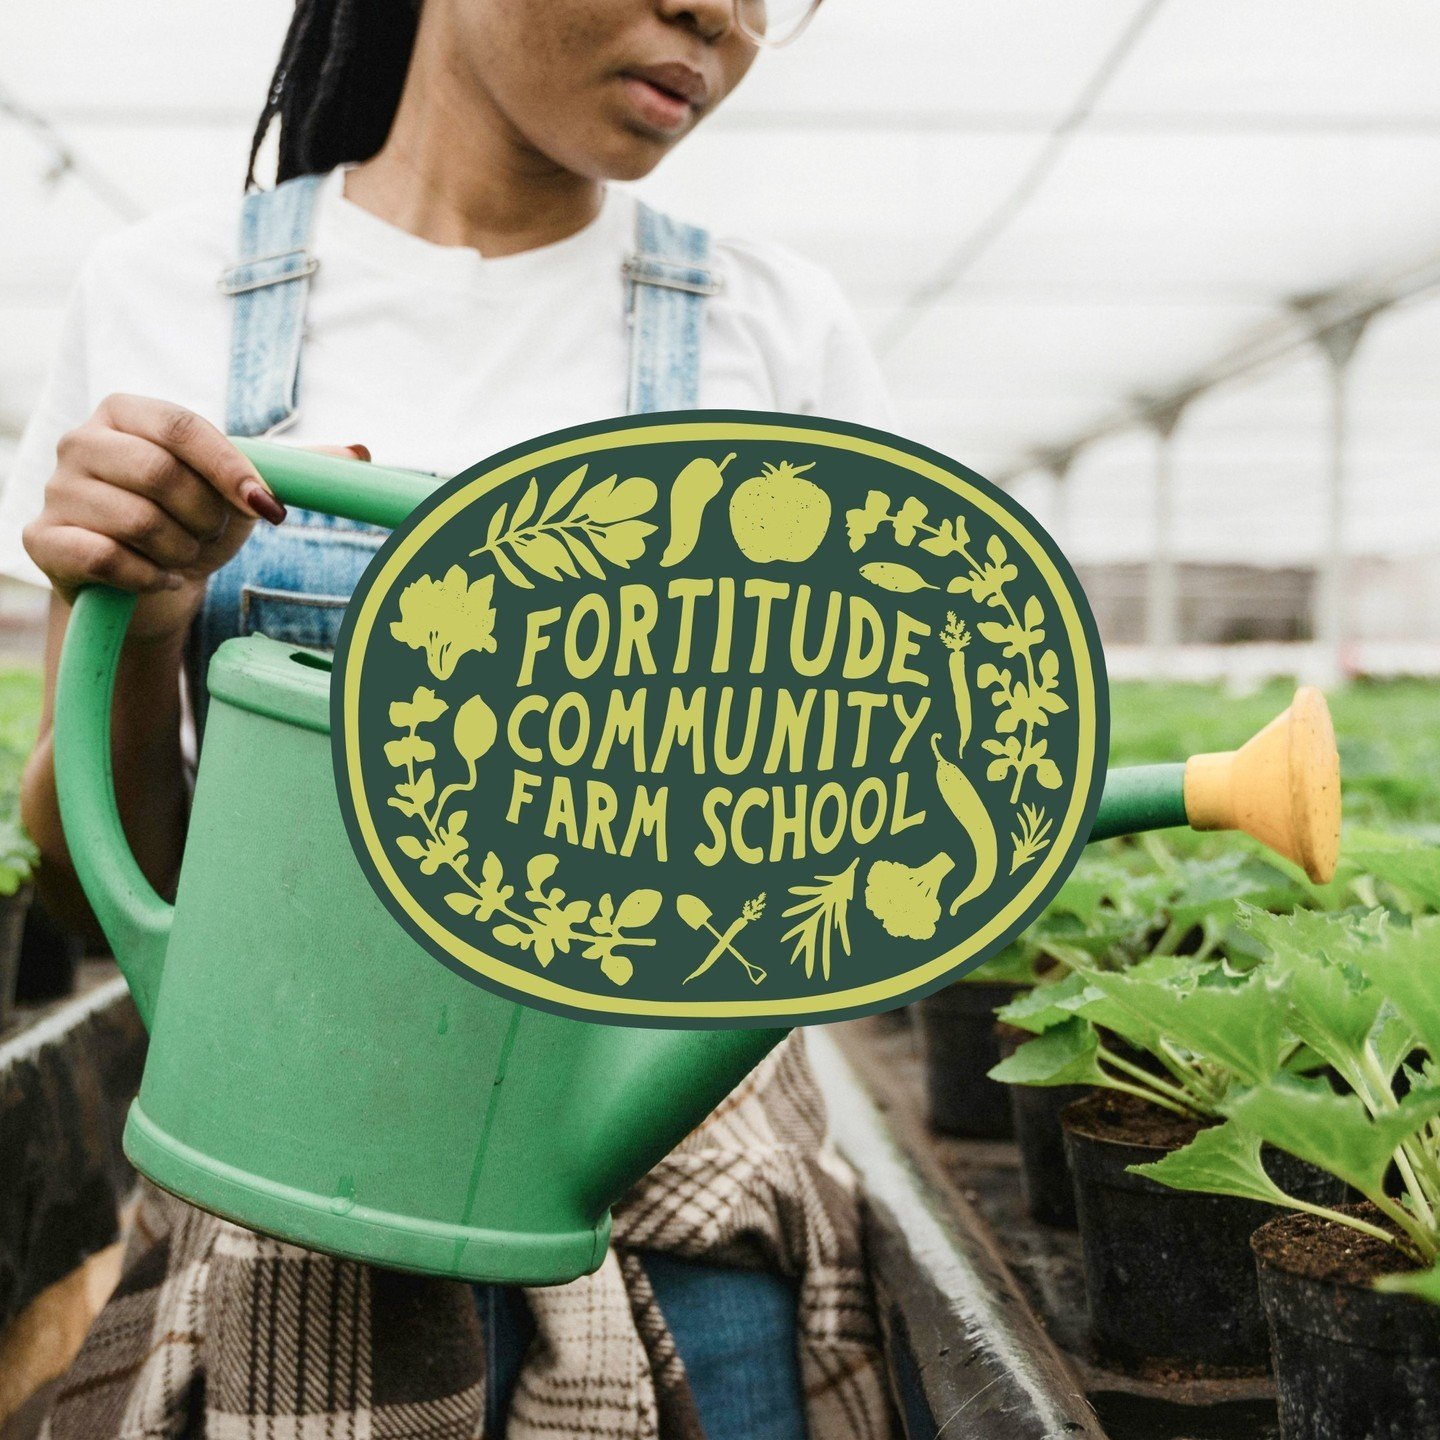 We love working with people who have a true vision for the future, and Fortitude Community Farm School has a HUGE vision for our community. ⁠
⁠
They are working hard to empower women, elevate BIPOC farmers, and fight food insecurity one community gar